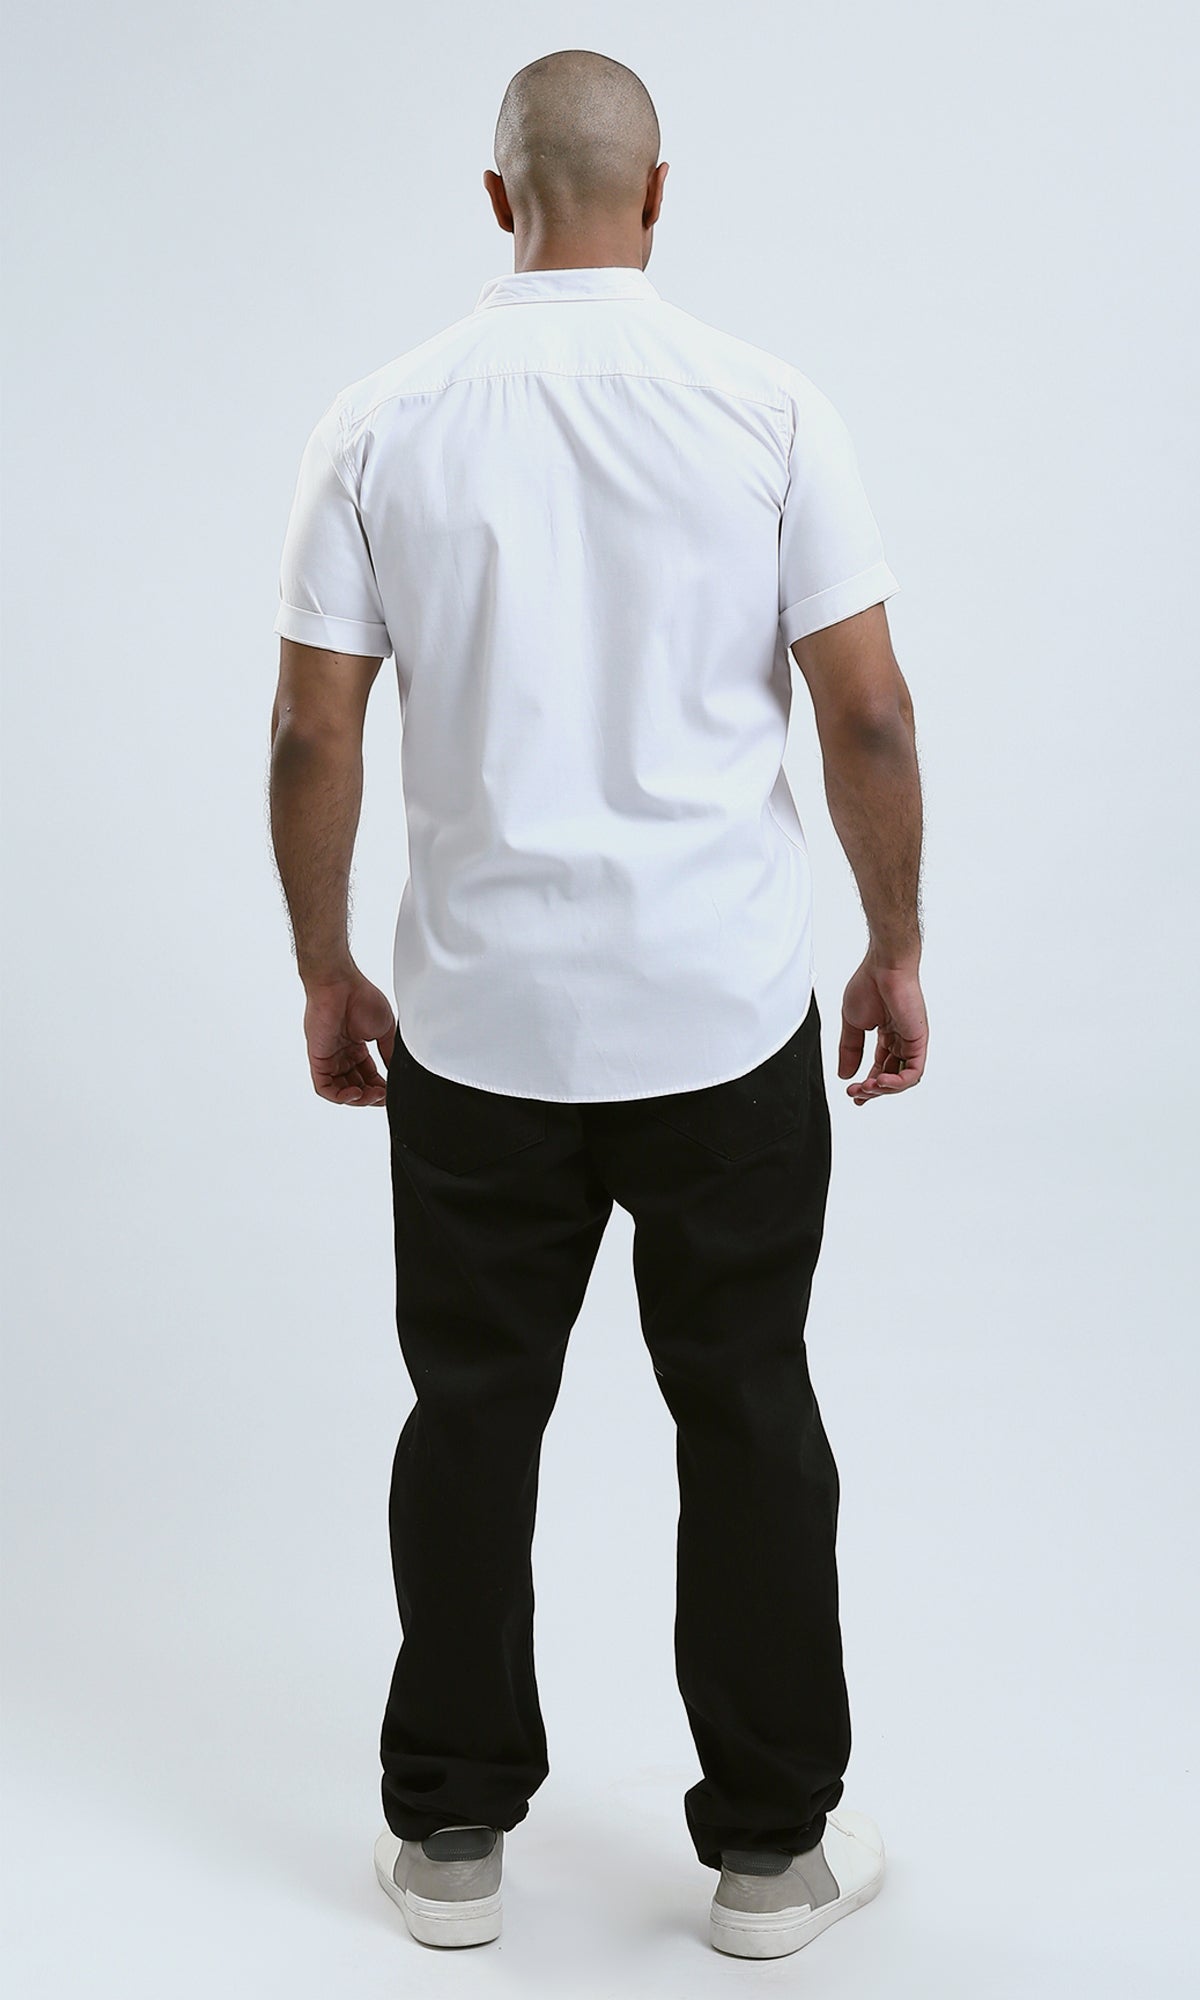 O187856 Relaxed Fit Short Sleeves White Shirt